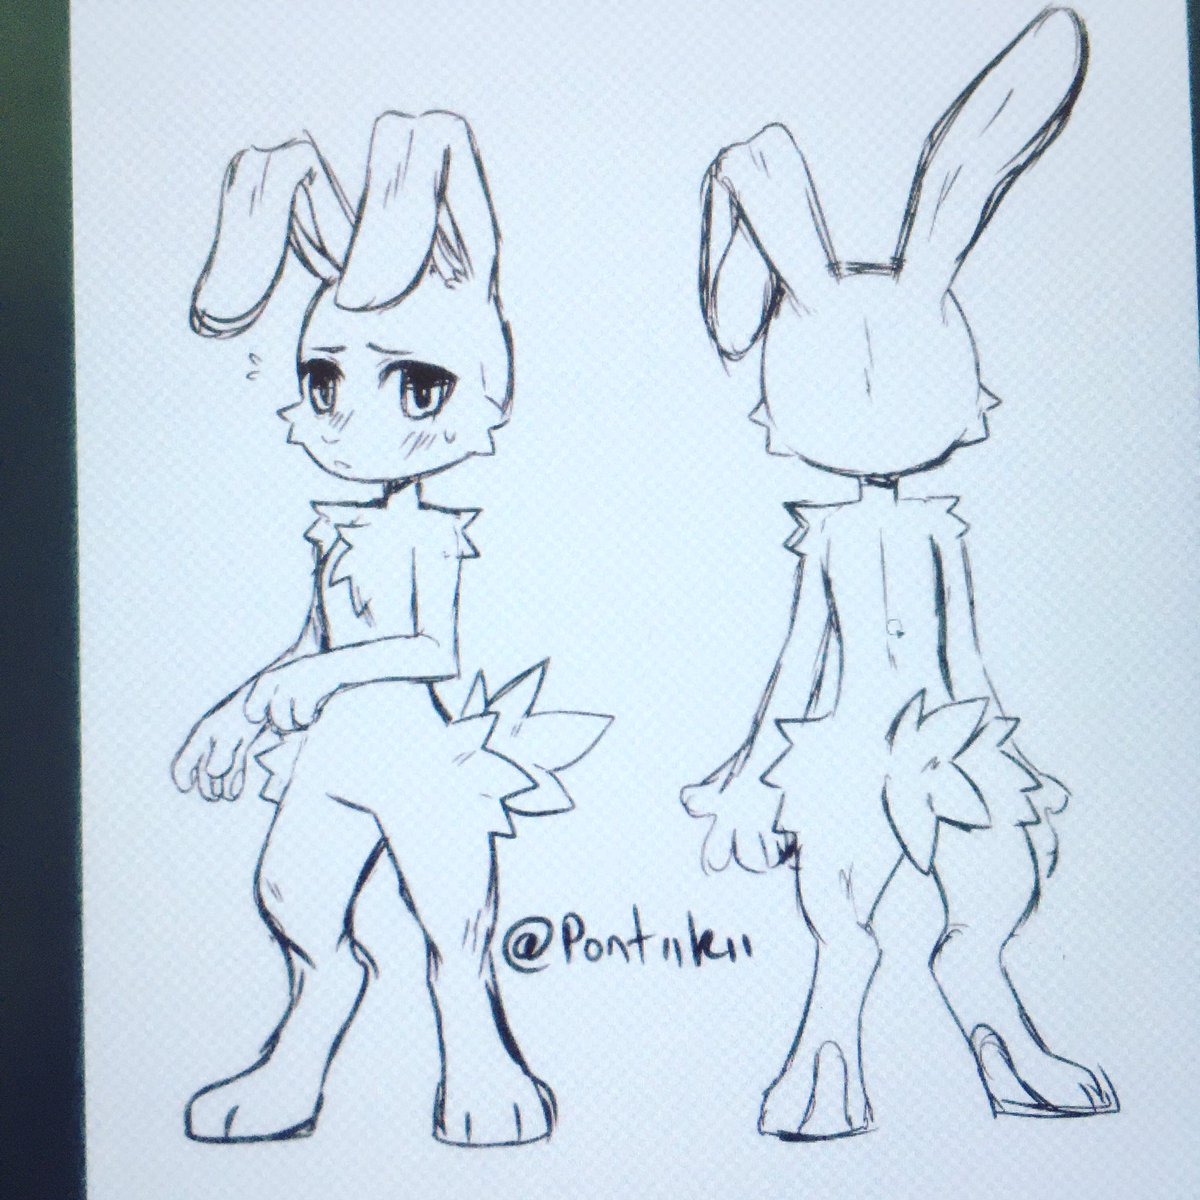 Yes, im working on a new sona..
I just dont connect with a mouse as much as yknow
I feel like a rabbit will suit me better for some reason, and they're just...
Easier to draw
And funner!!
I WILL keep Ponti, and i think she might just turn into a second sona or something like that 